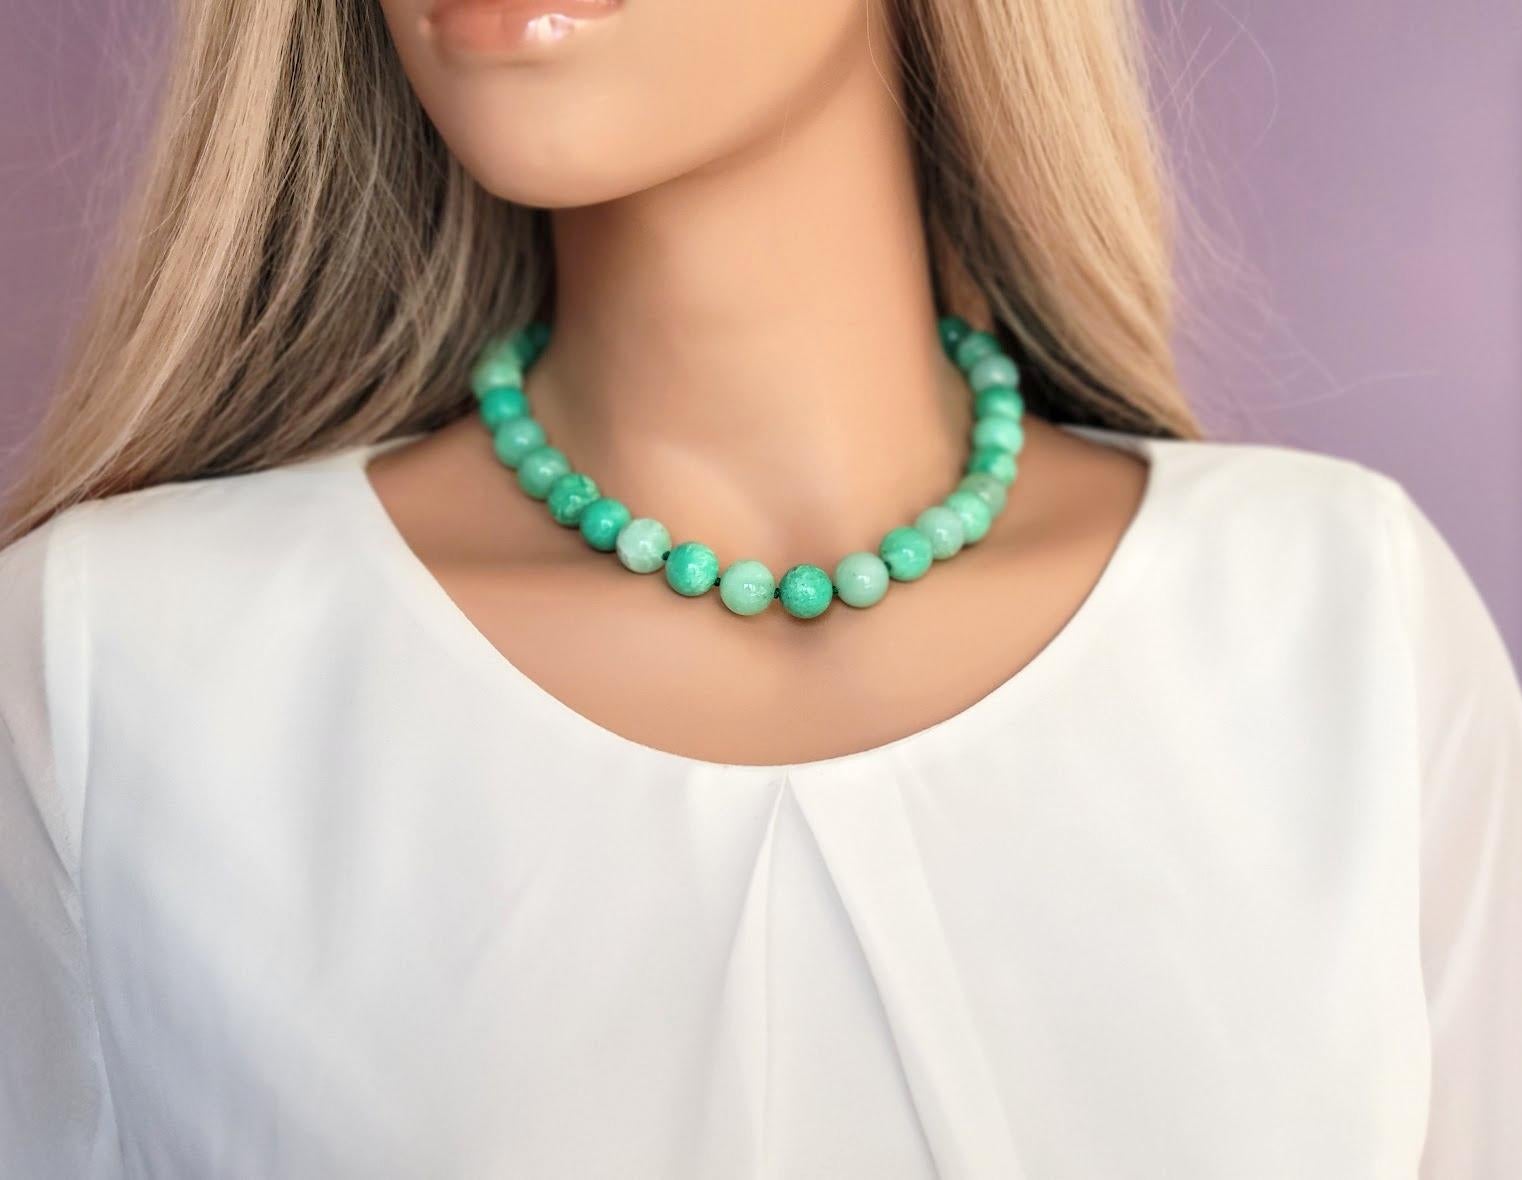 The length of the necklace is 18 inches ( 45.7 cm). The size of the smooth, high-quality round beads is 13 - 14 mm.
The color of this stone is apple-green.
Authentic, natural color. No thermal or other mechanical treatments were used.
The necklace